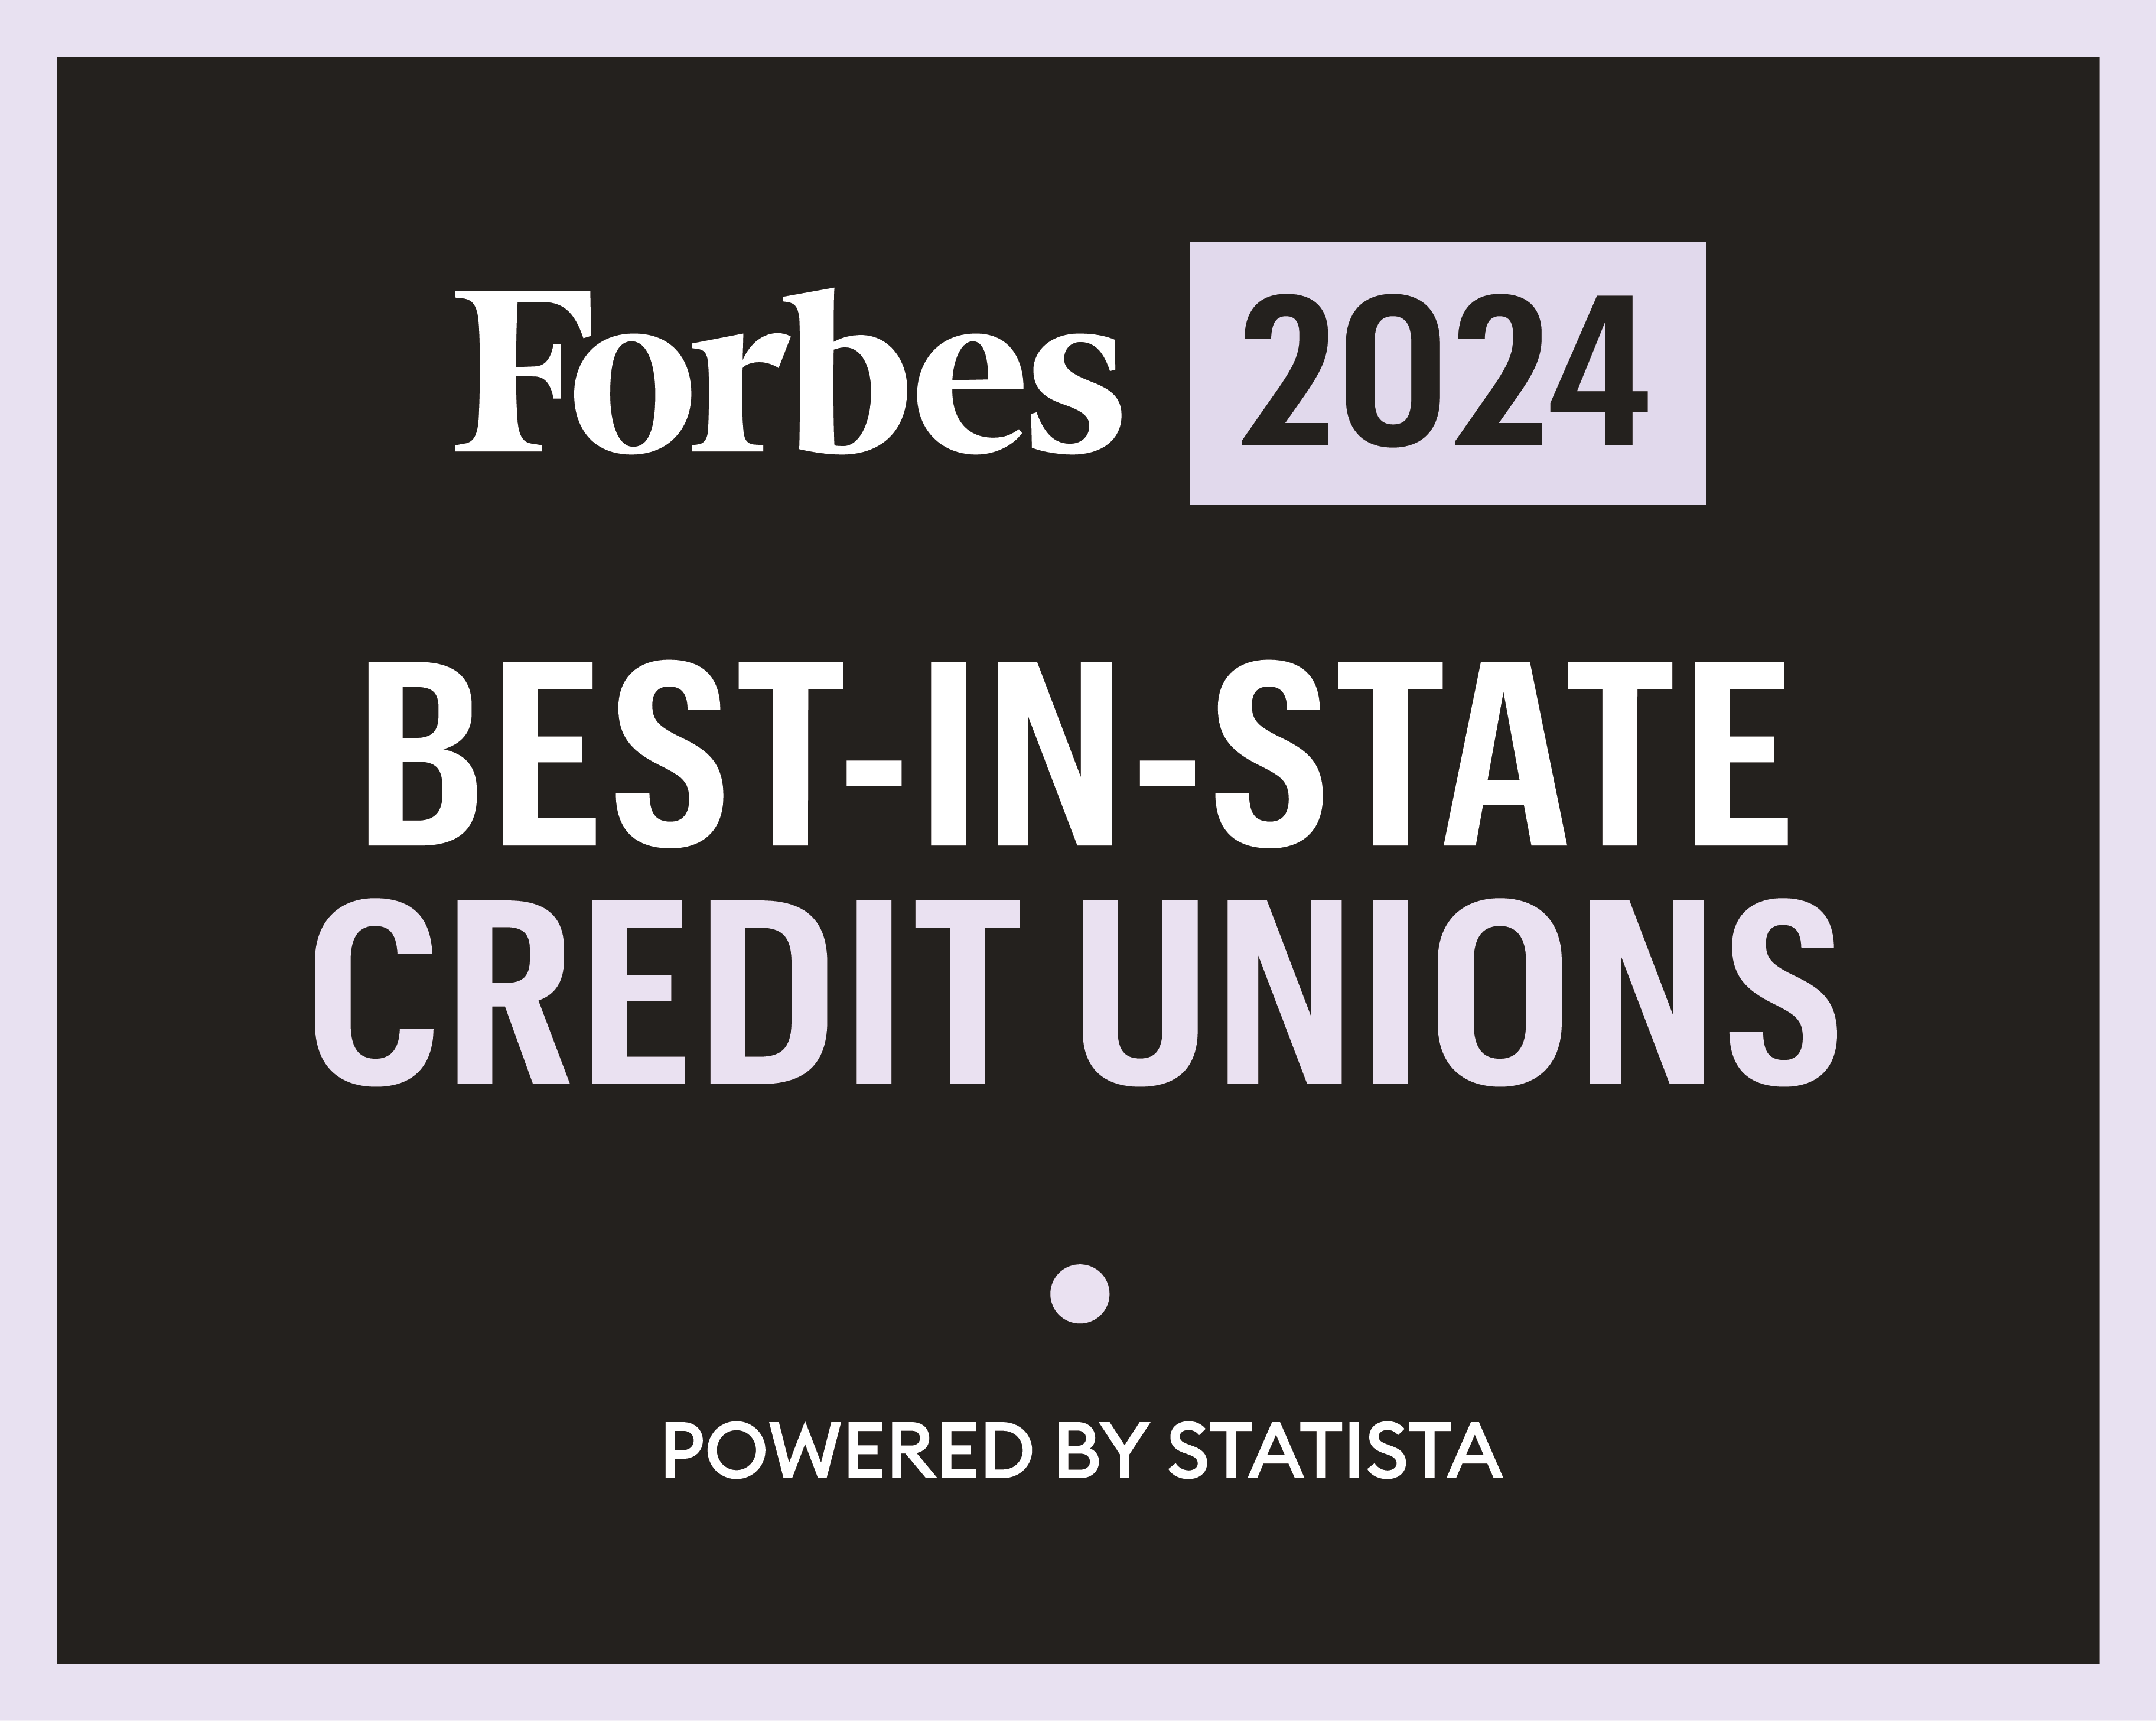 Forbes 2024 Best in State Credit Unions